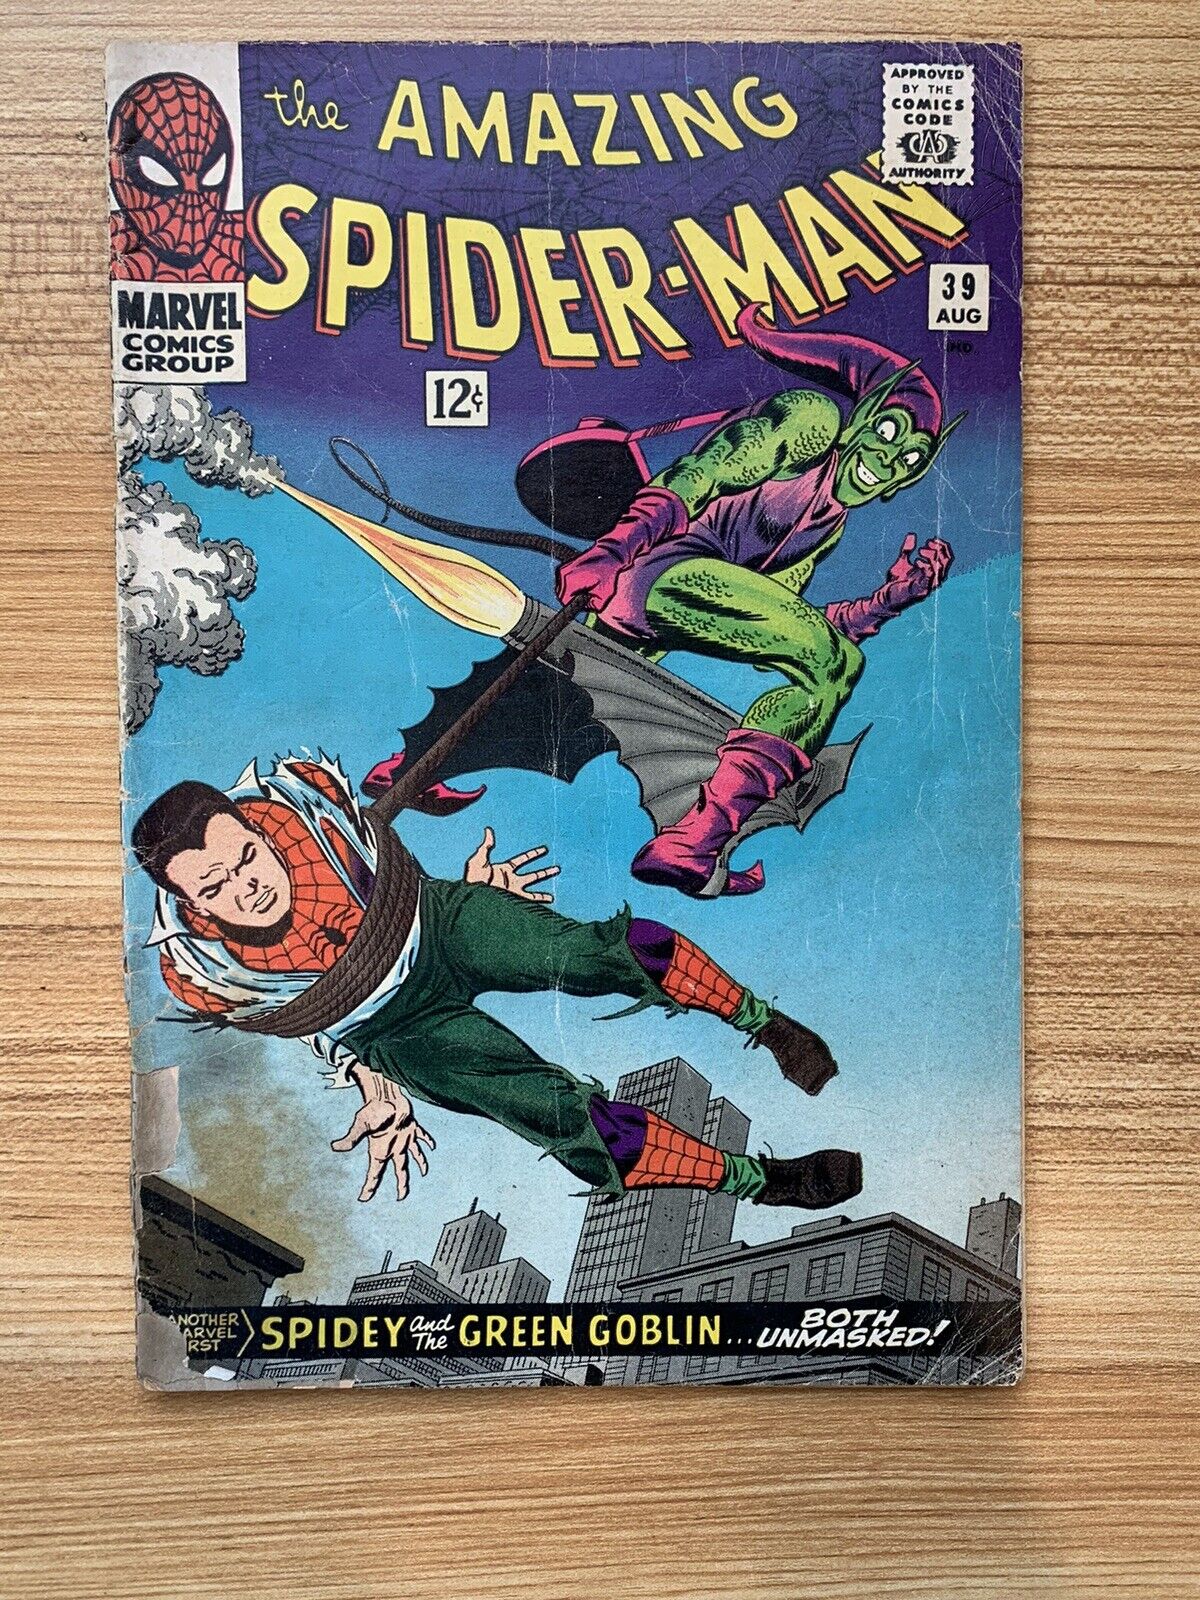 Amazing Spider-Man #39 DAMAGED CUT PAGES First Green Goblin 1966 POOR CONDITION